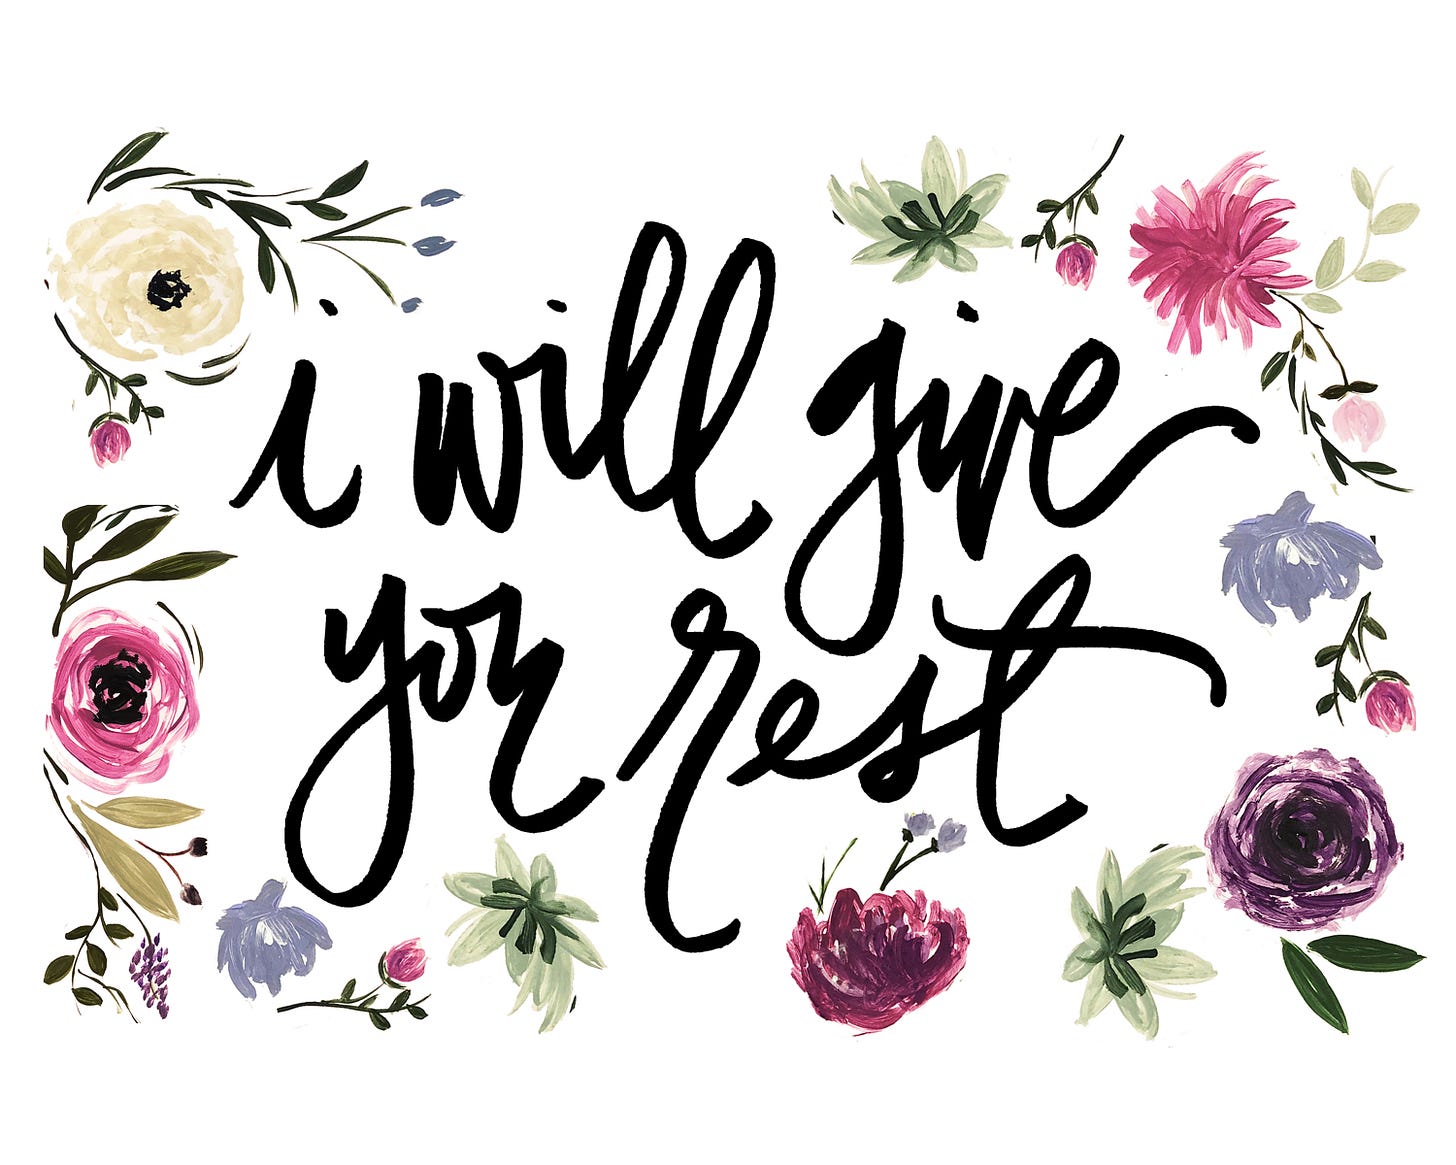 the phrase "I will give you rest" is written in black cursive with illustrations of flowers surrounding the text